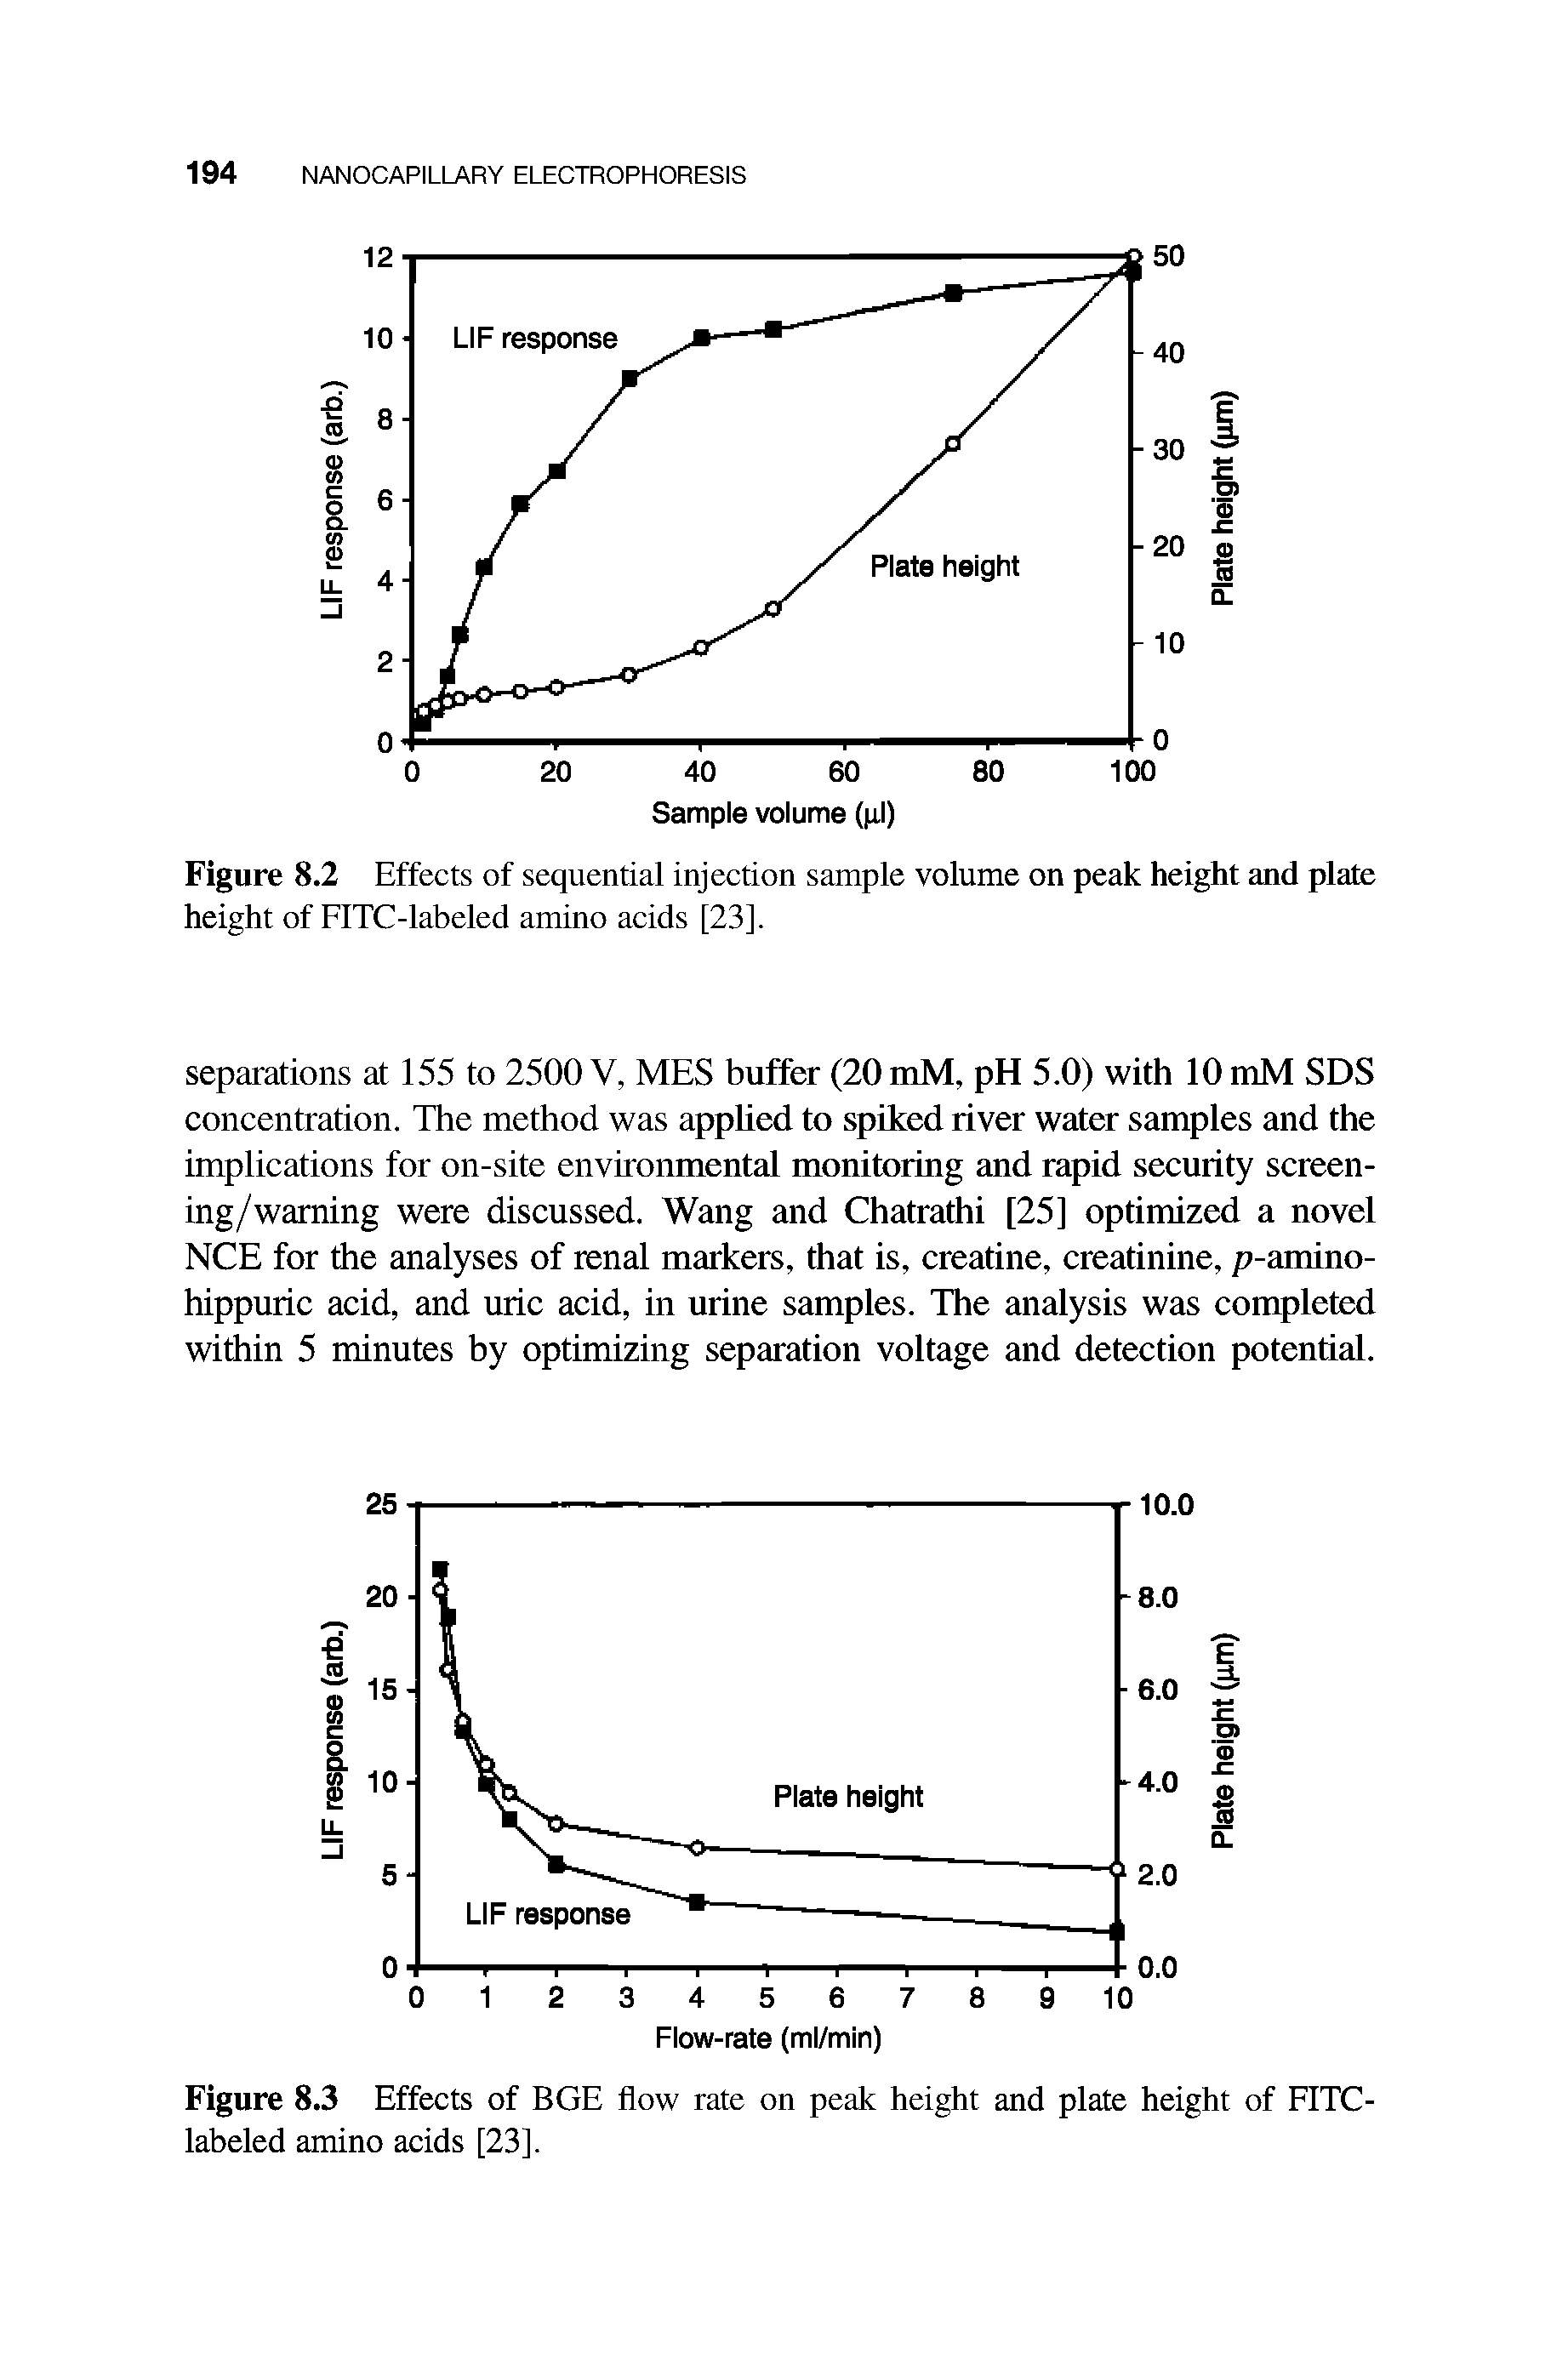 Figure 8.2 Effects of sequential injection sample volume on peak height and plate height of FITC-labeled amino acids [23].